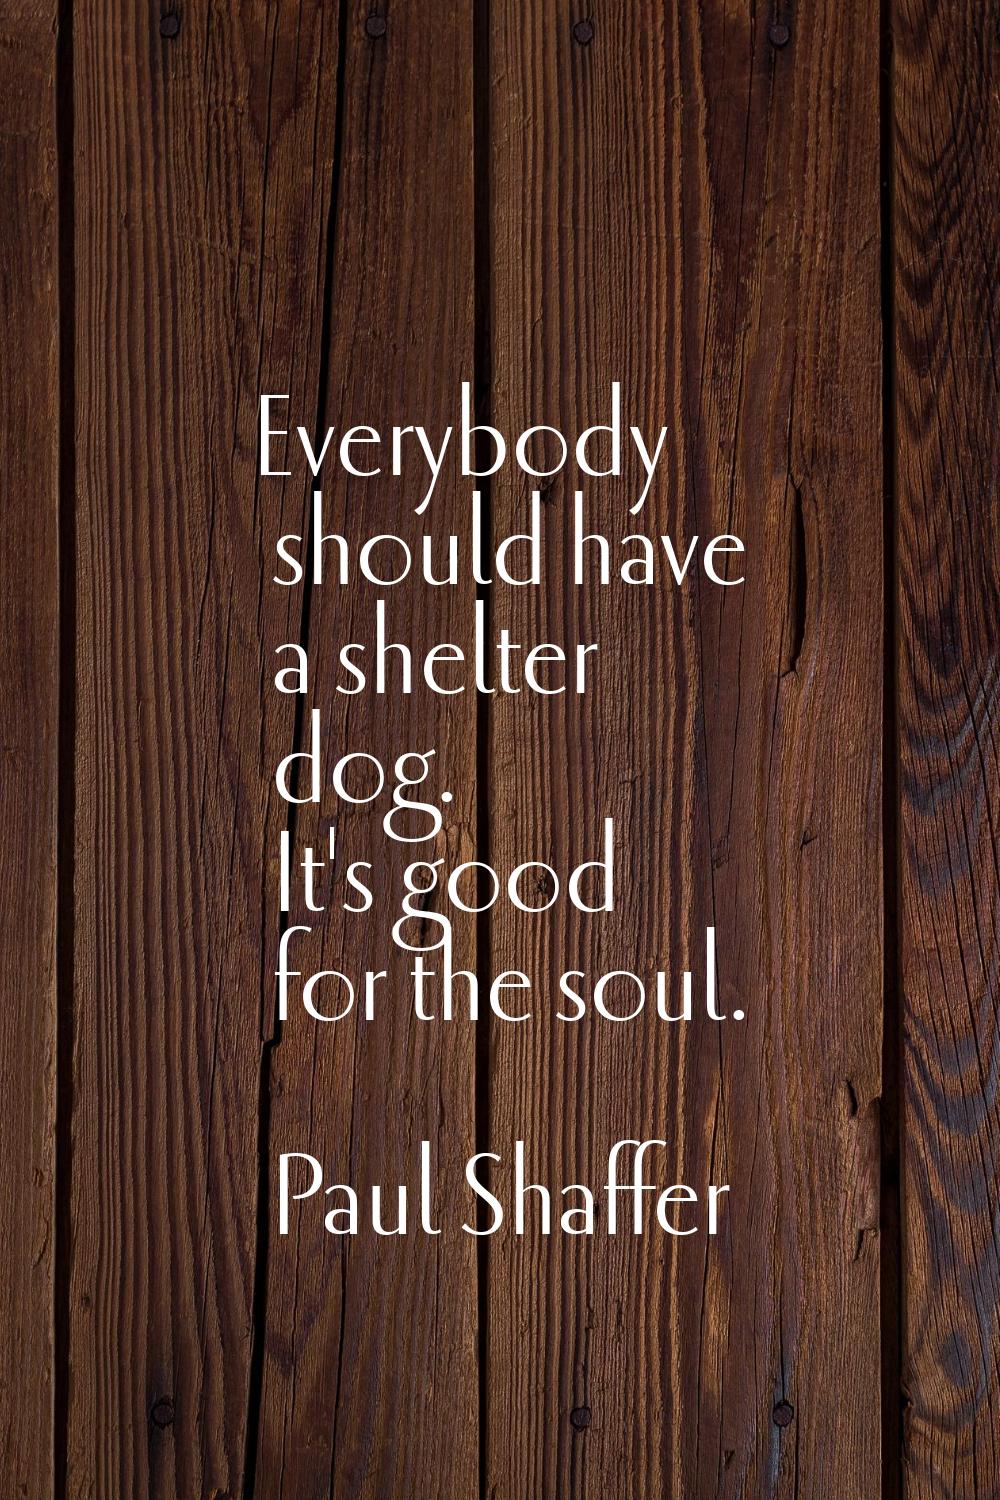 Everybody should have a shelter dog. It's good for the soul.